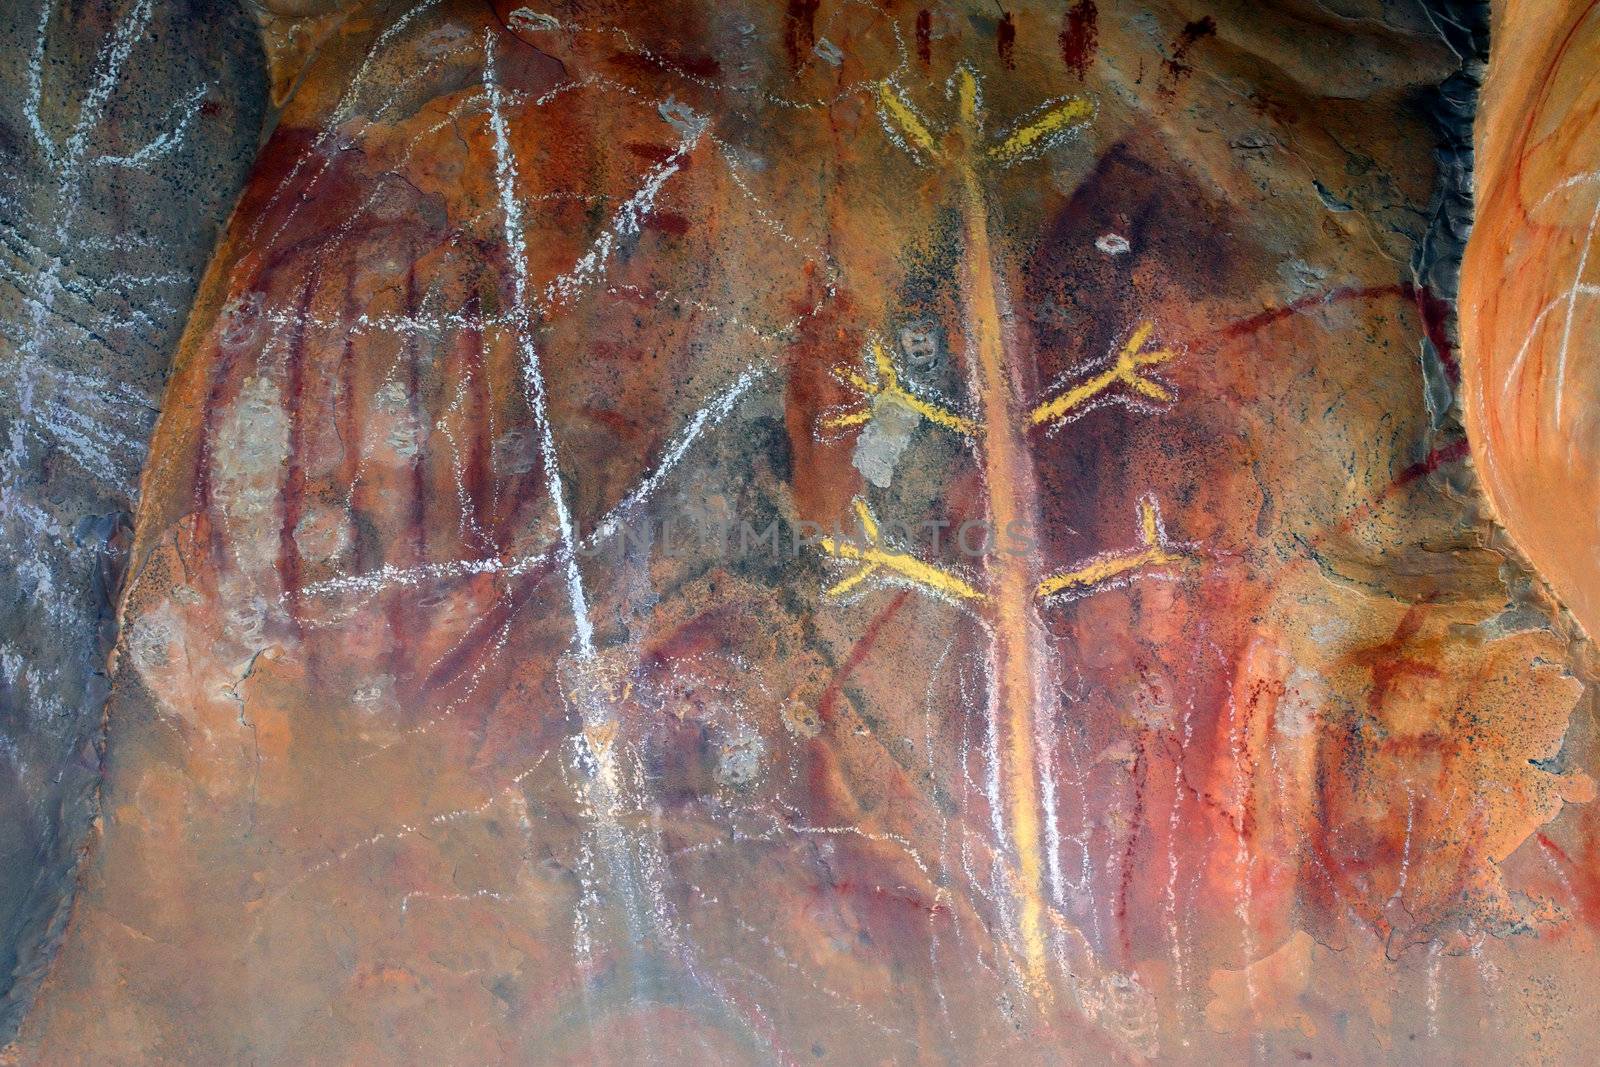 Aboriginal rock art thousands of years old, from Northern Australia.
